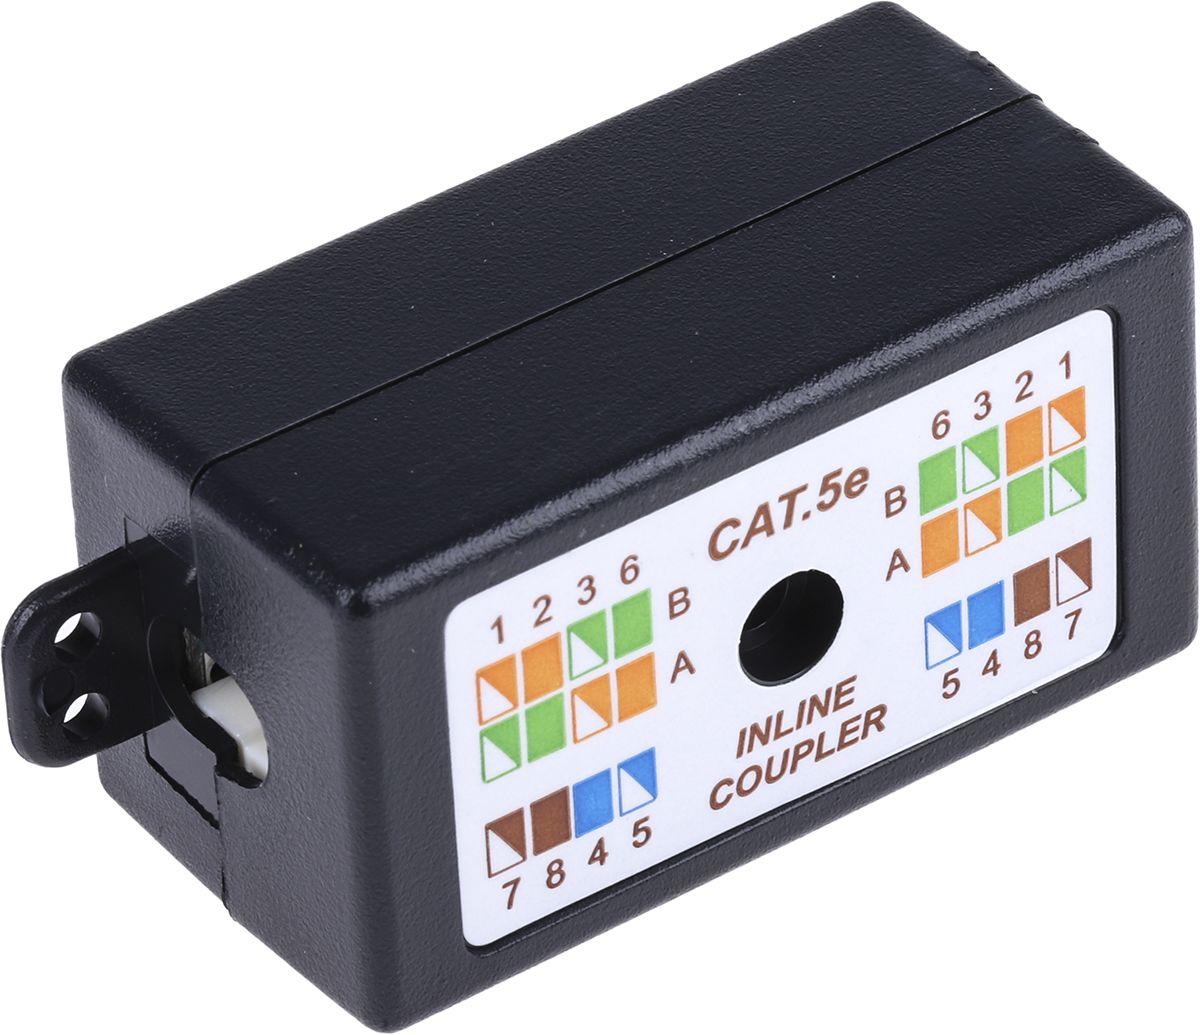 RS PRO 2-Port Punch Down Wiring Box, Cat5e, UTP